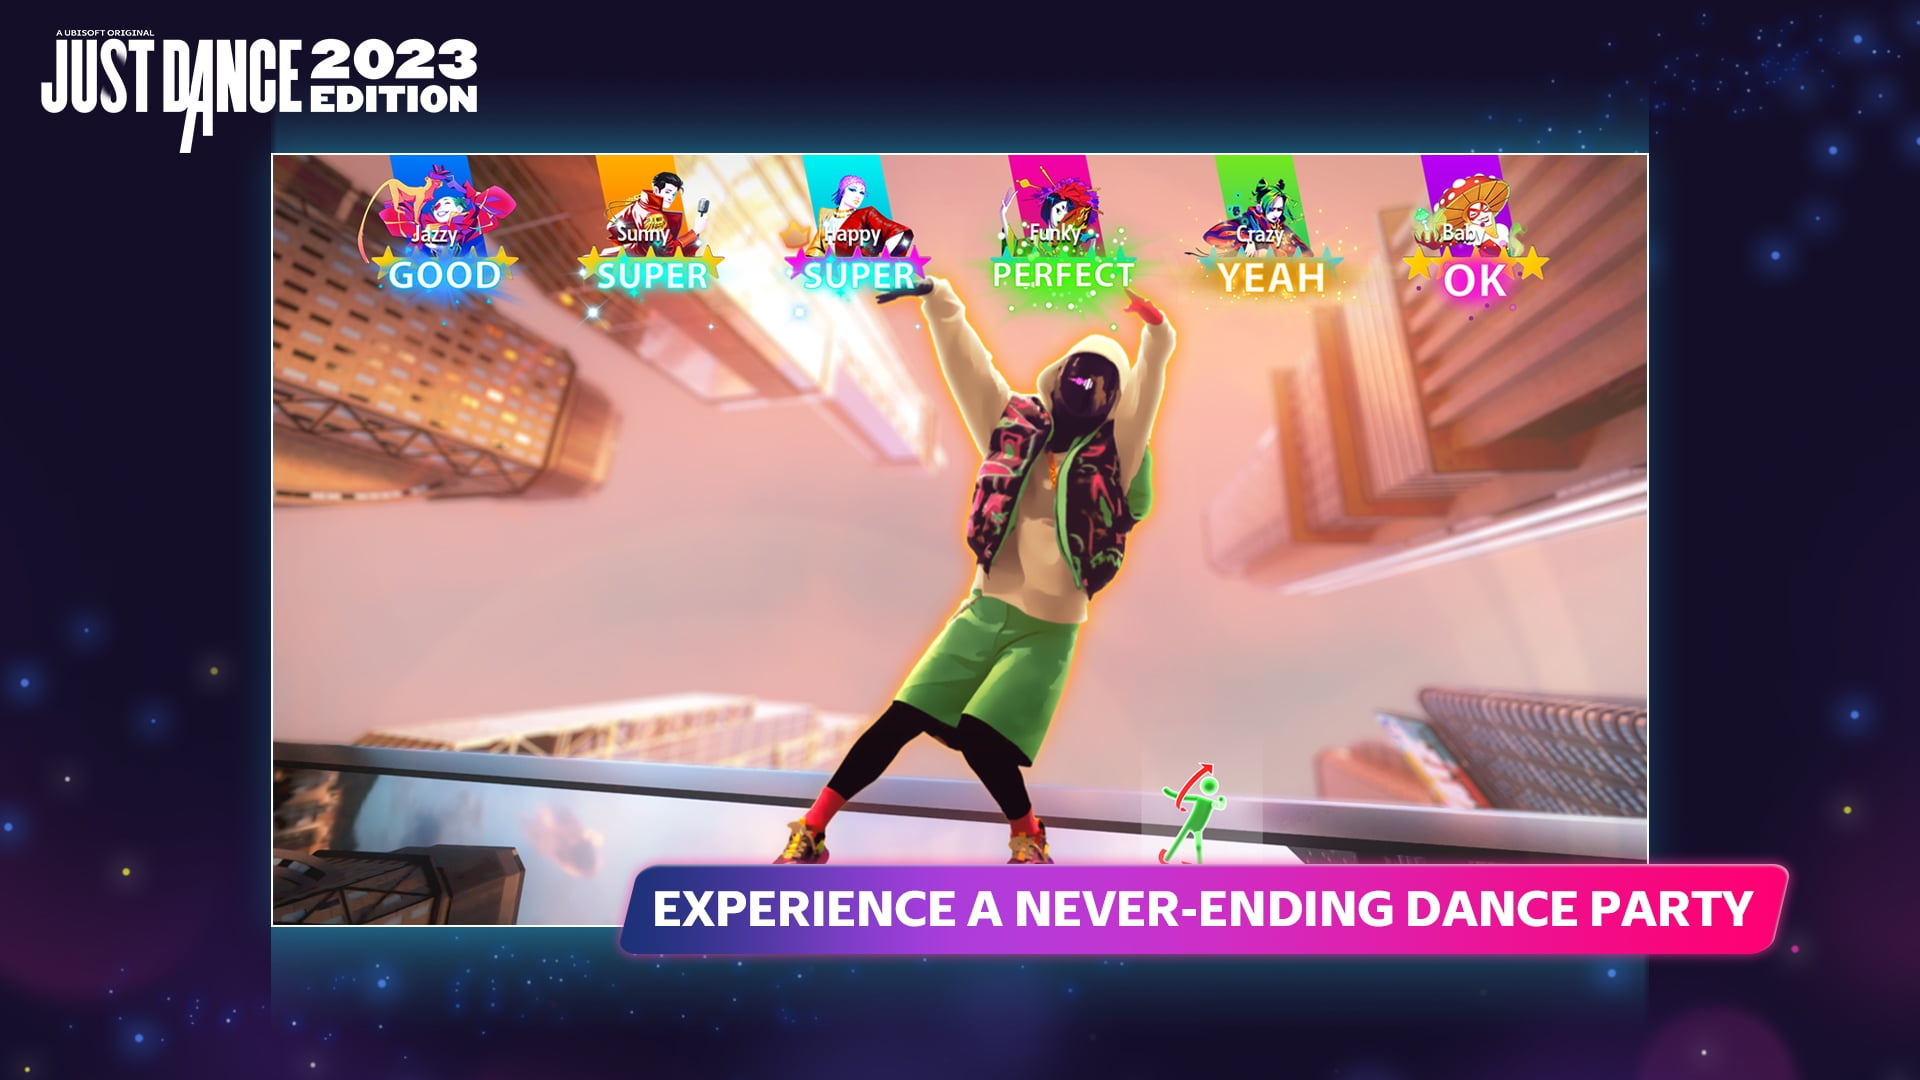 Just Dance - Edition Nintendo Box) in 2023 Switch (Code